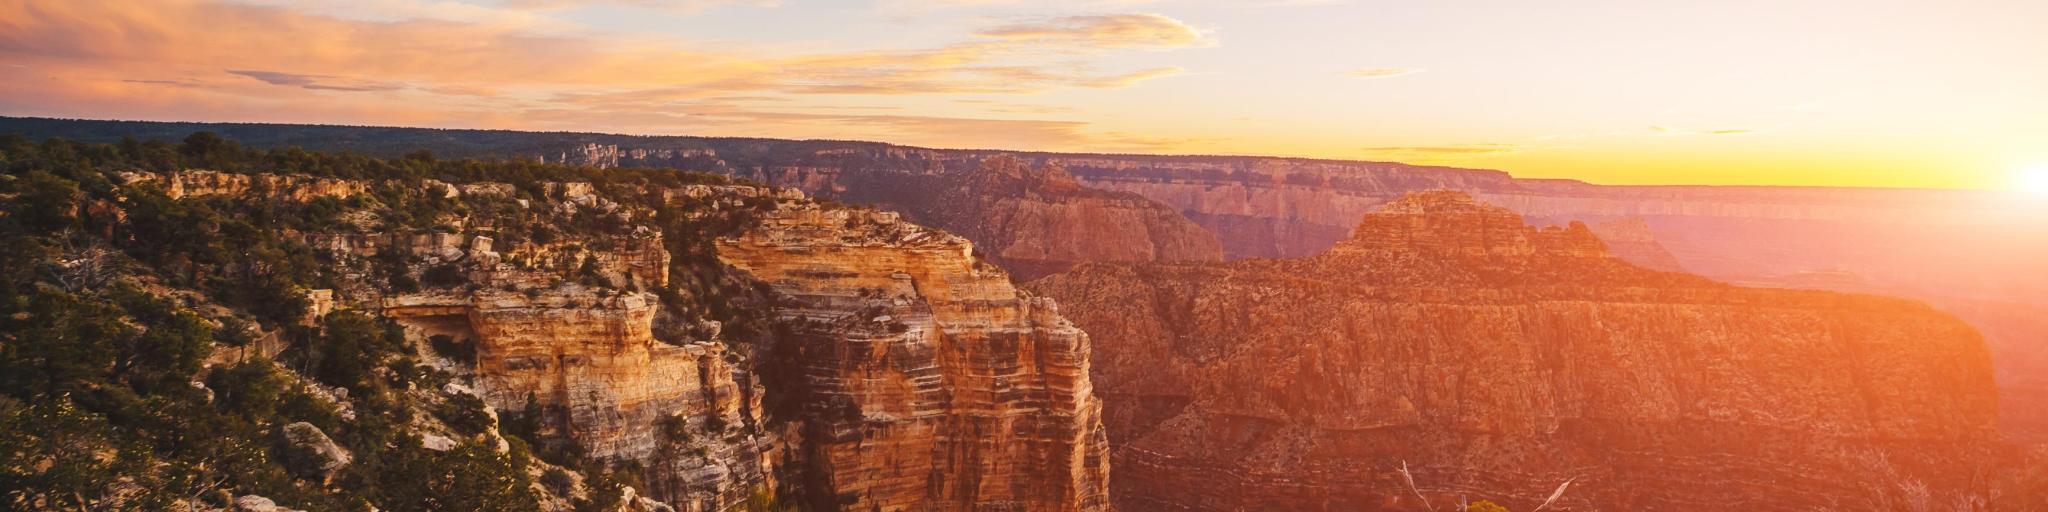 Grand Canyon National Park, Arizona, USA with a view of The River Colorado which runs through the Grand Canyon at sunset.